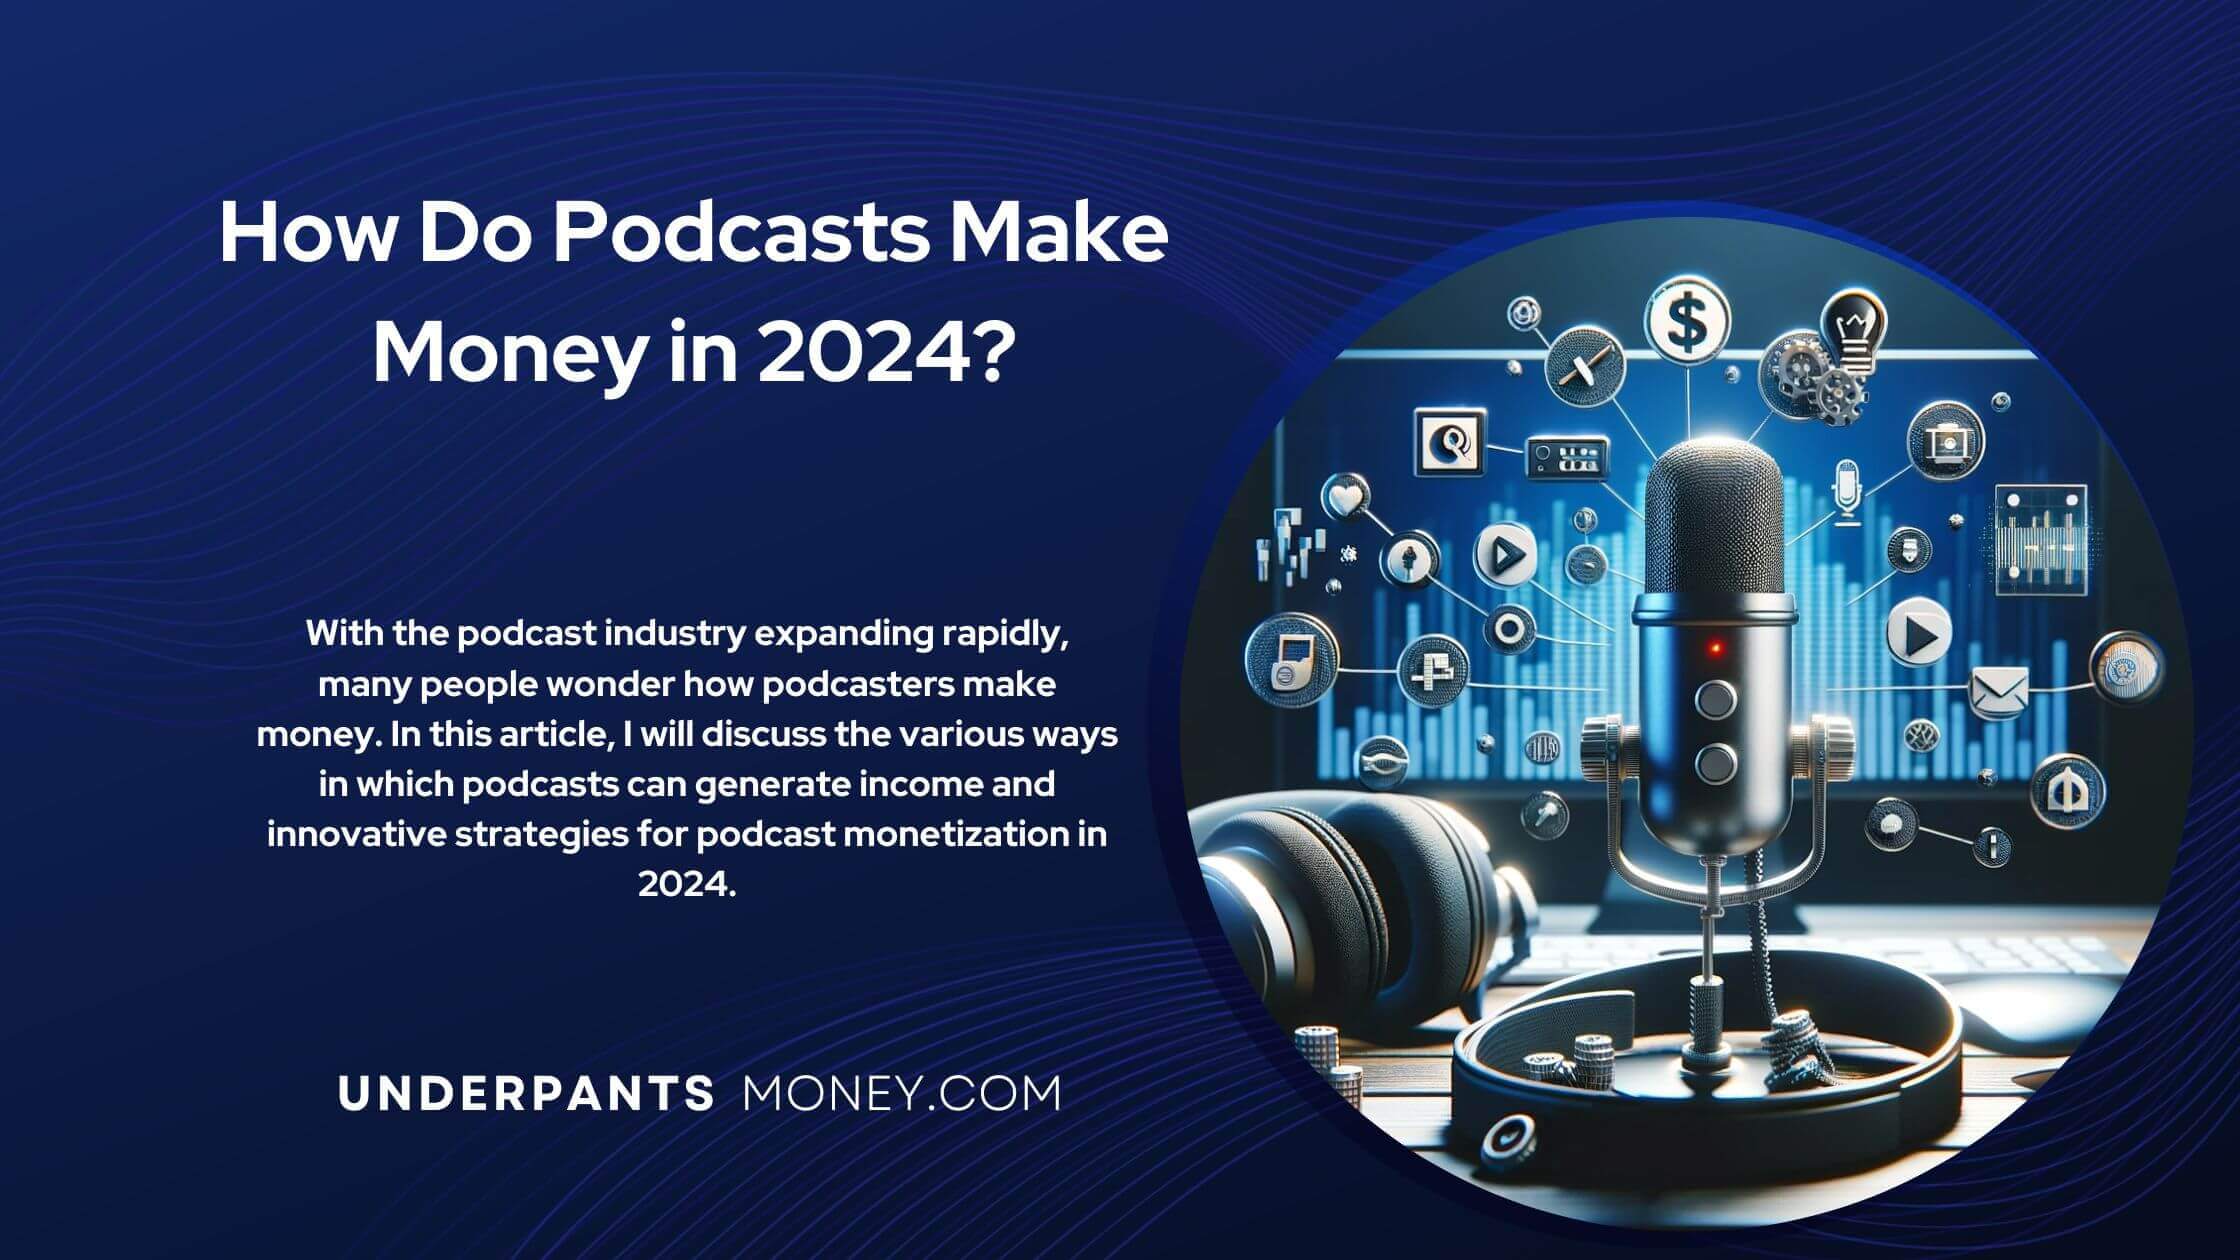 How do podcasts make money title with description on blue background next to image of podcast microphone, headphones and floating symbols of podcasts